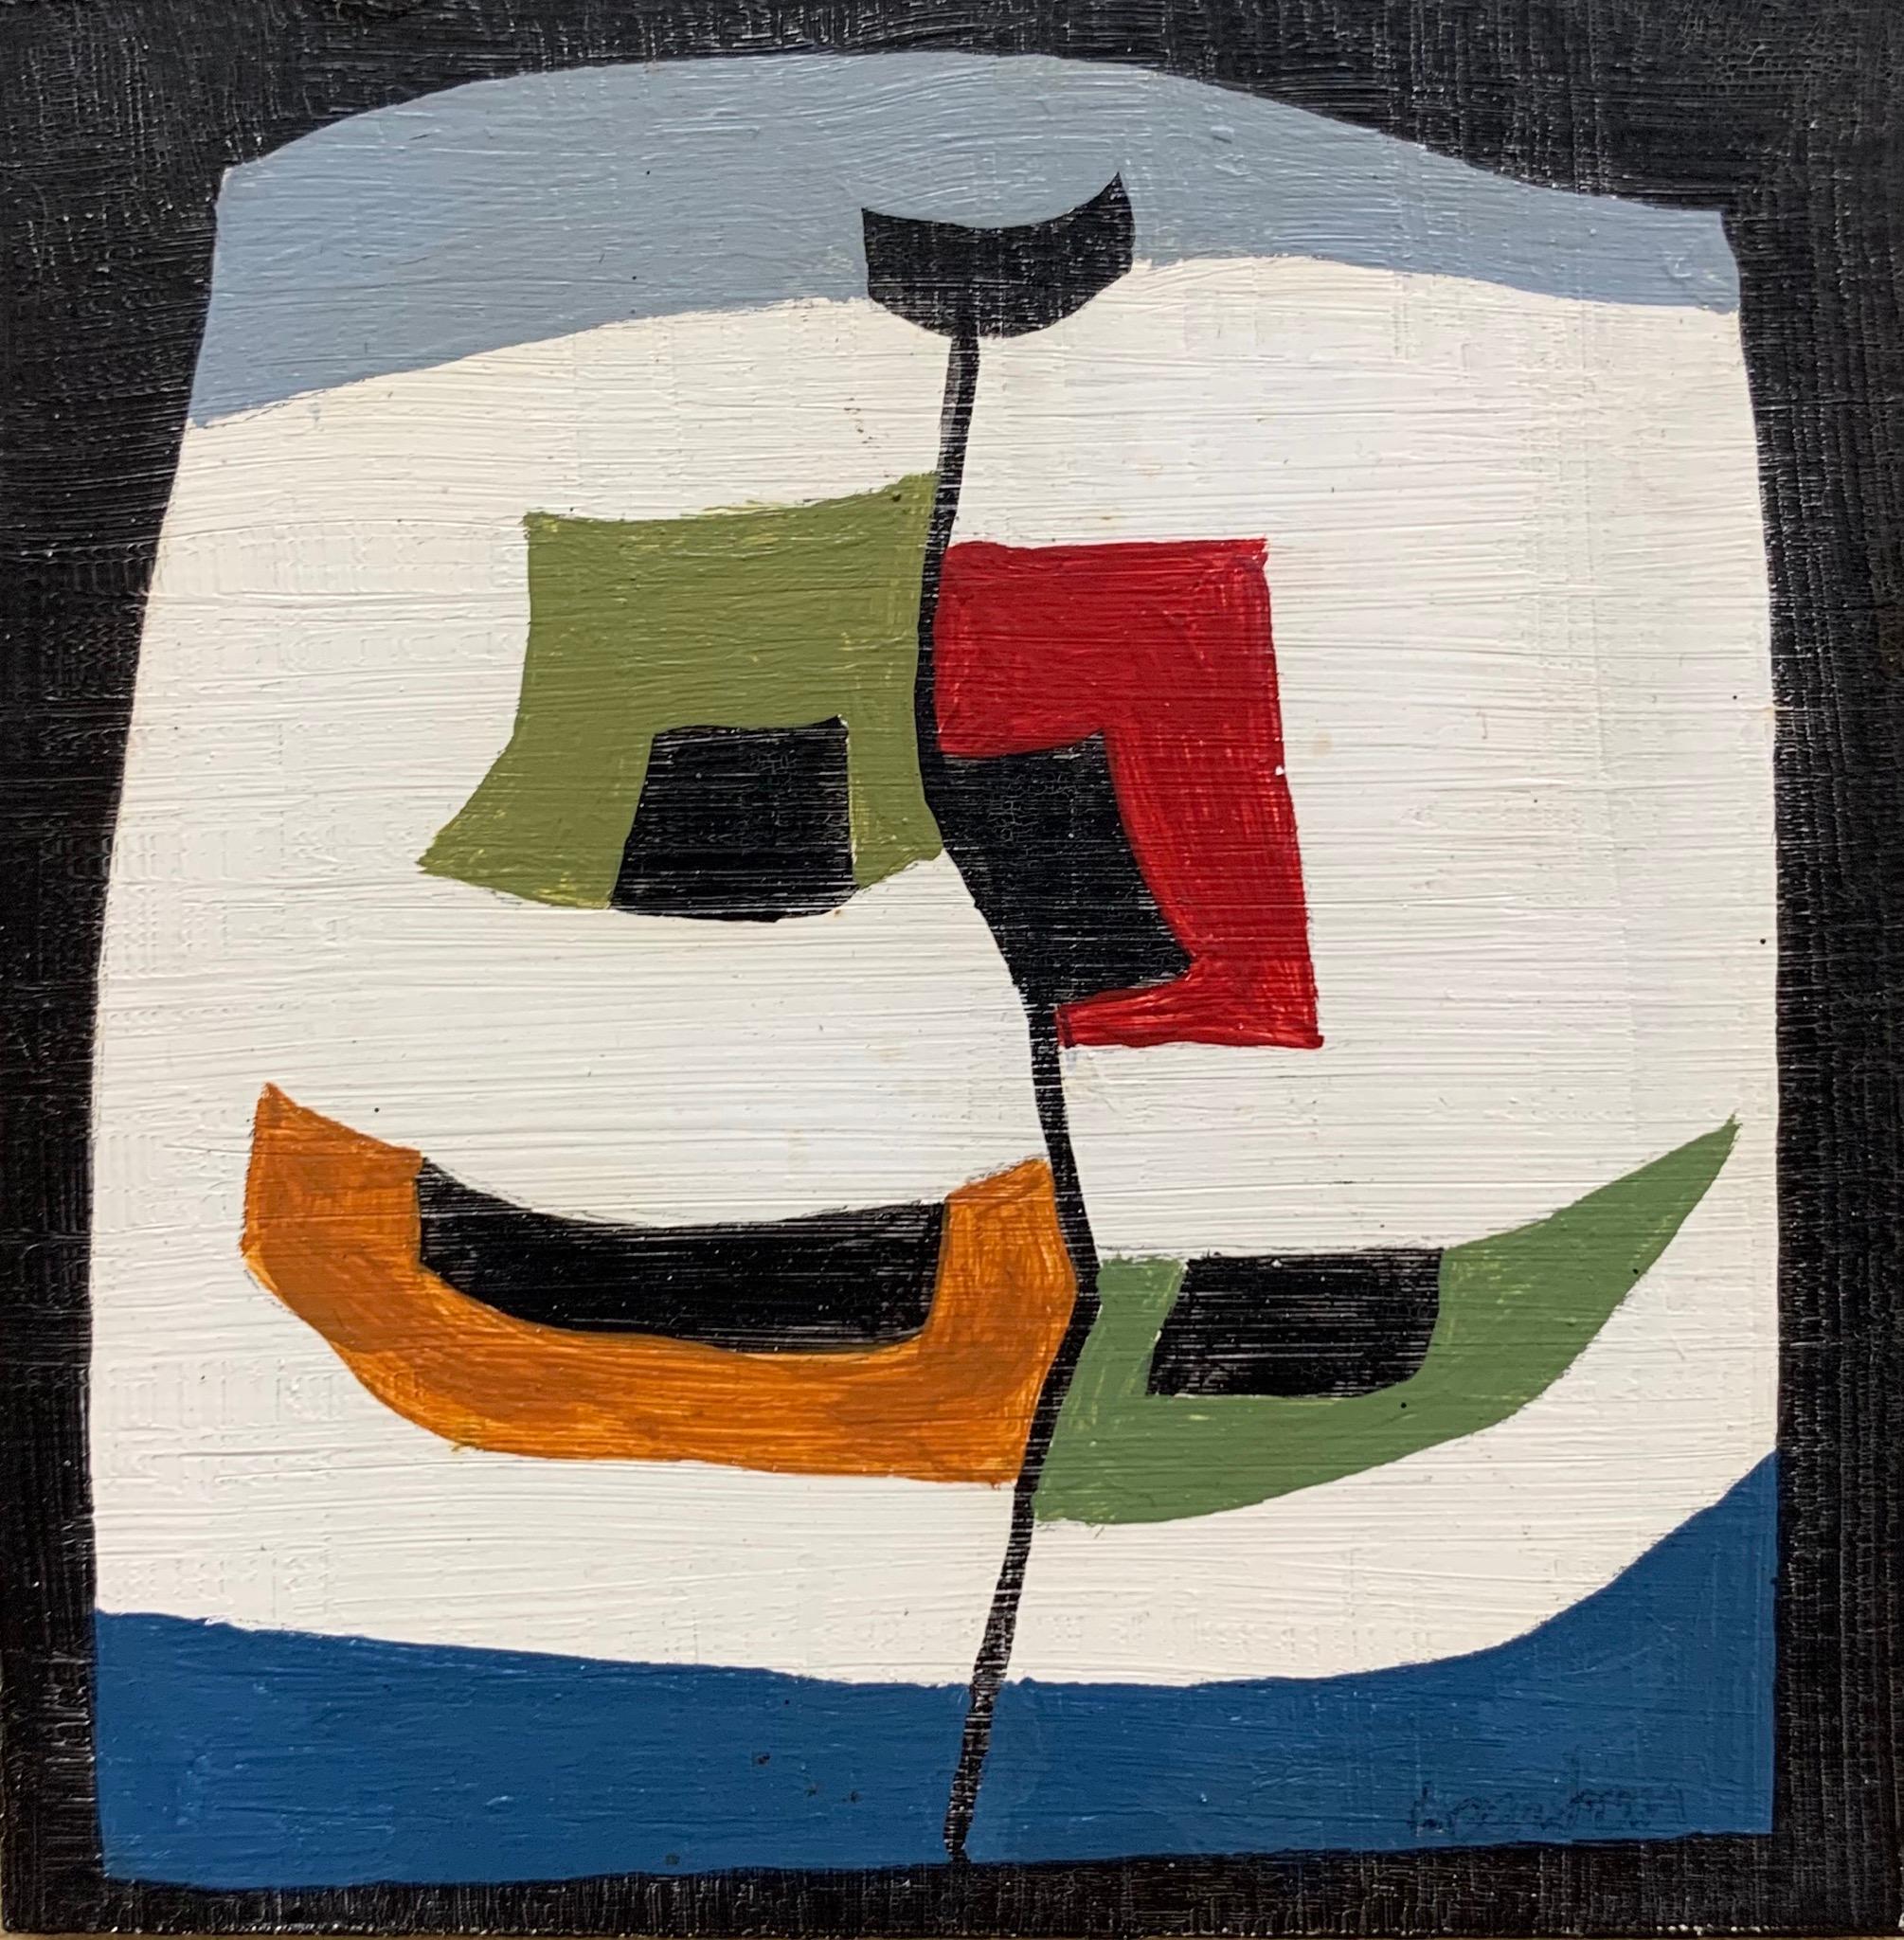 1950’s CubisM abstract Flag Arrangements  - Painting by Edward Landon